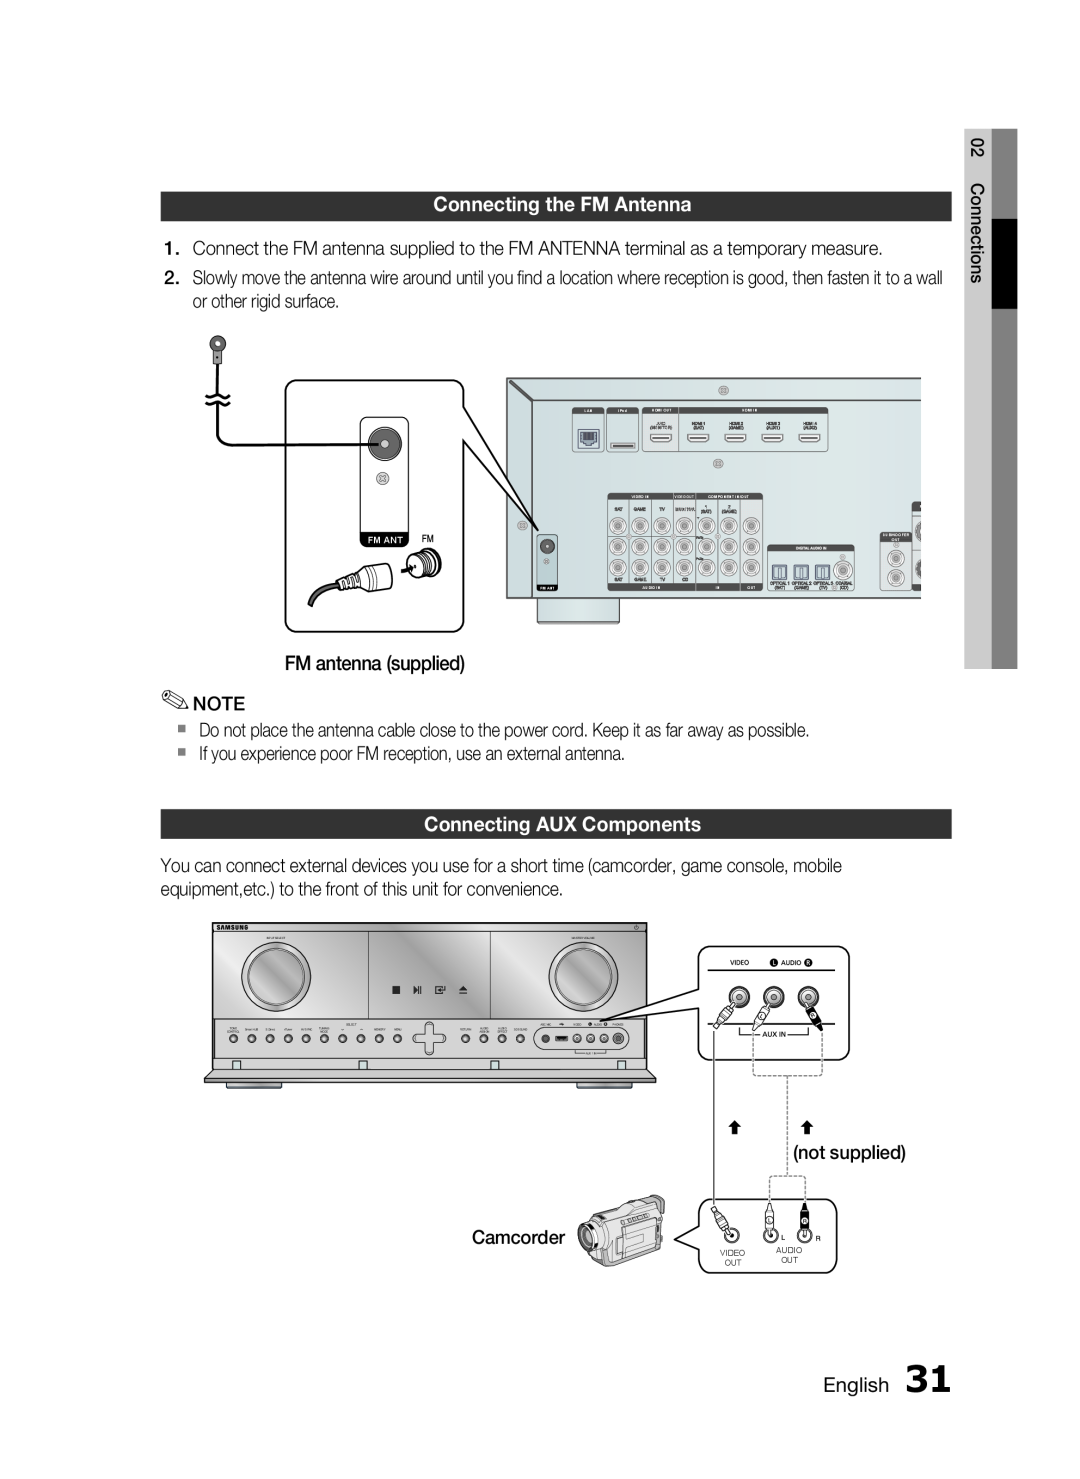 Samsung HW-D7000 user manual Connecting the FM Antenna, Connecting AUX Components, FM antenna supplied, English 